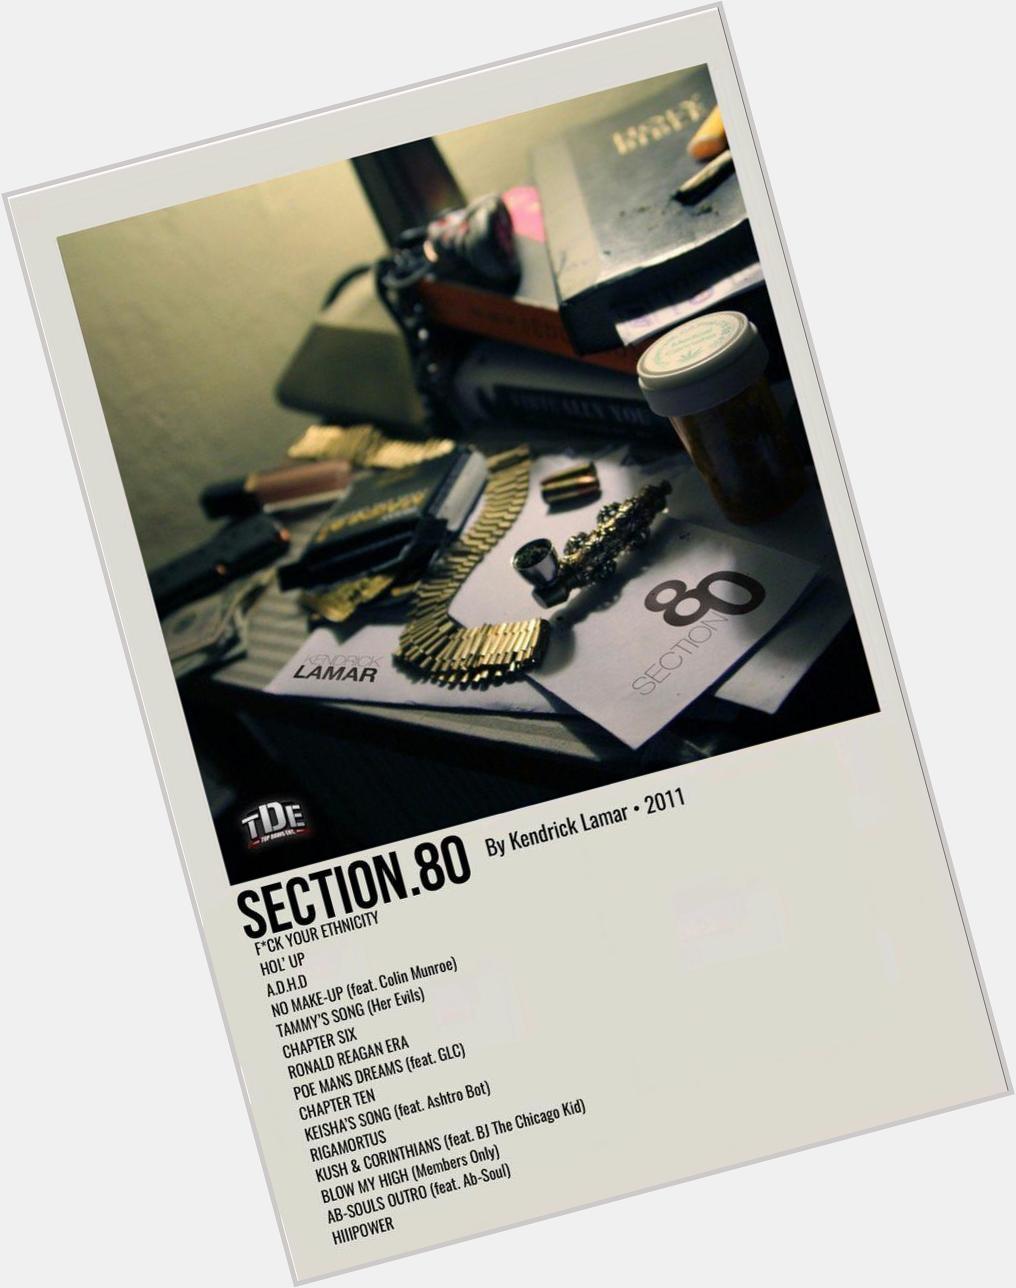 Happy birthday to \"section.80\" by Kendrick Lamar, 11 years and i love this album. 